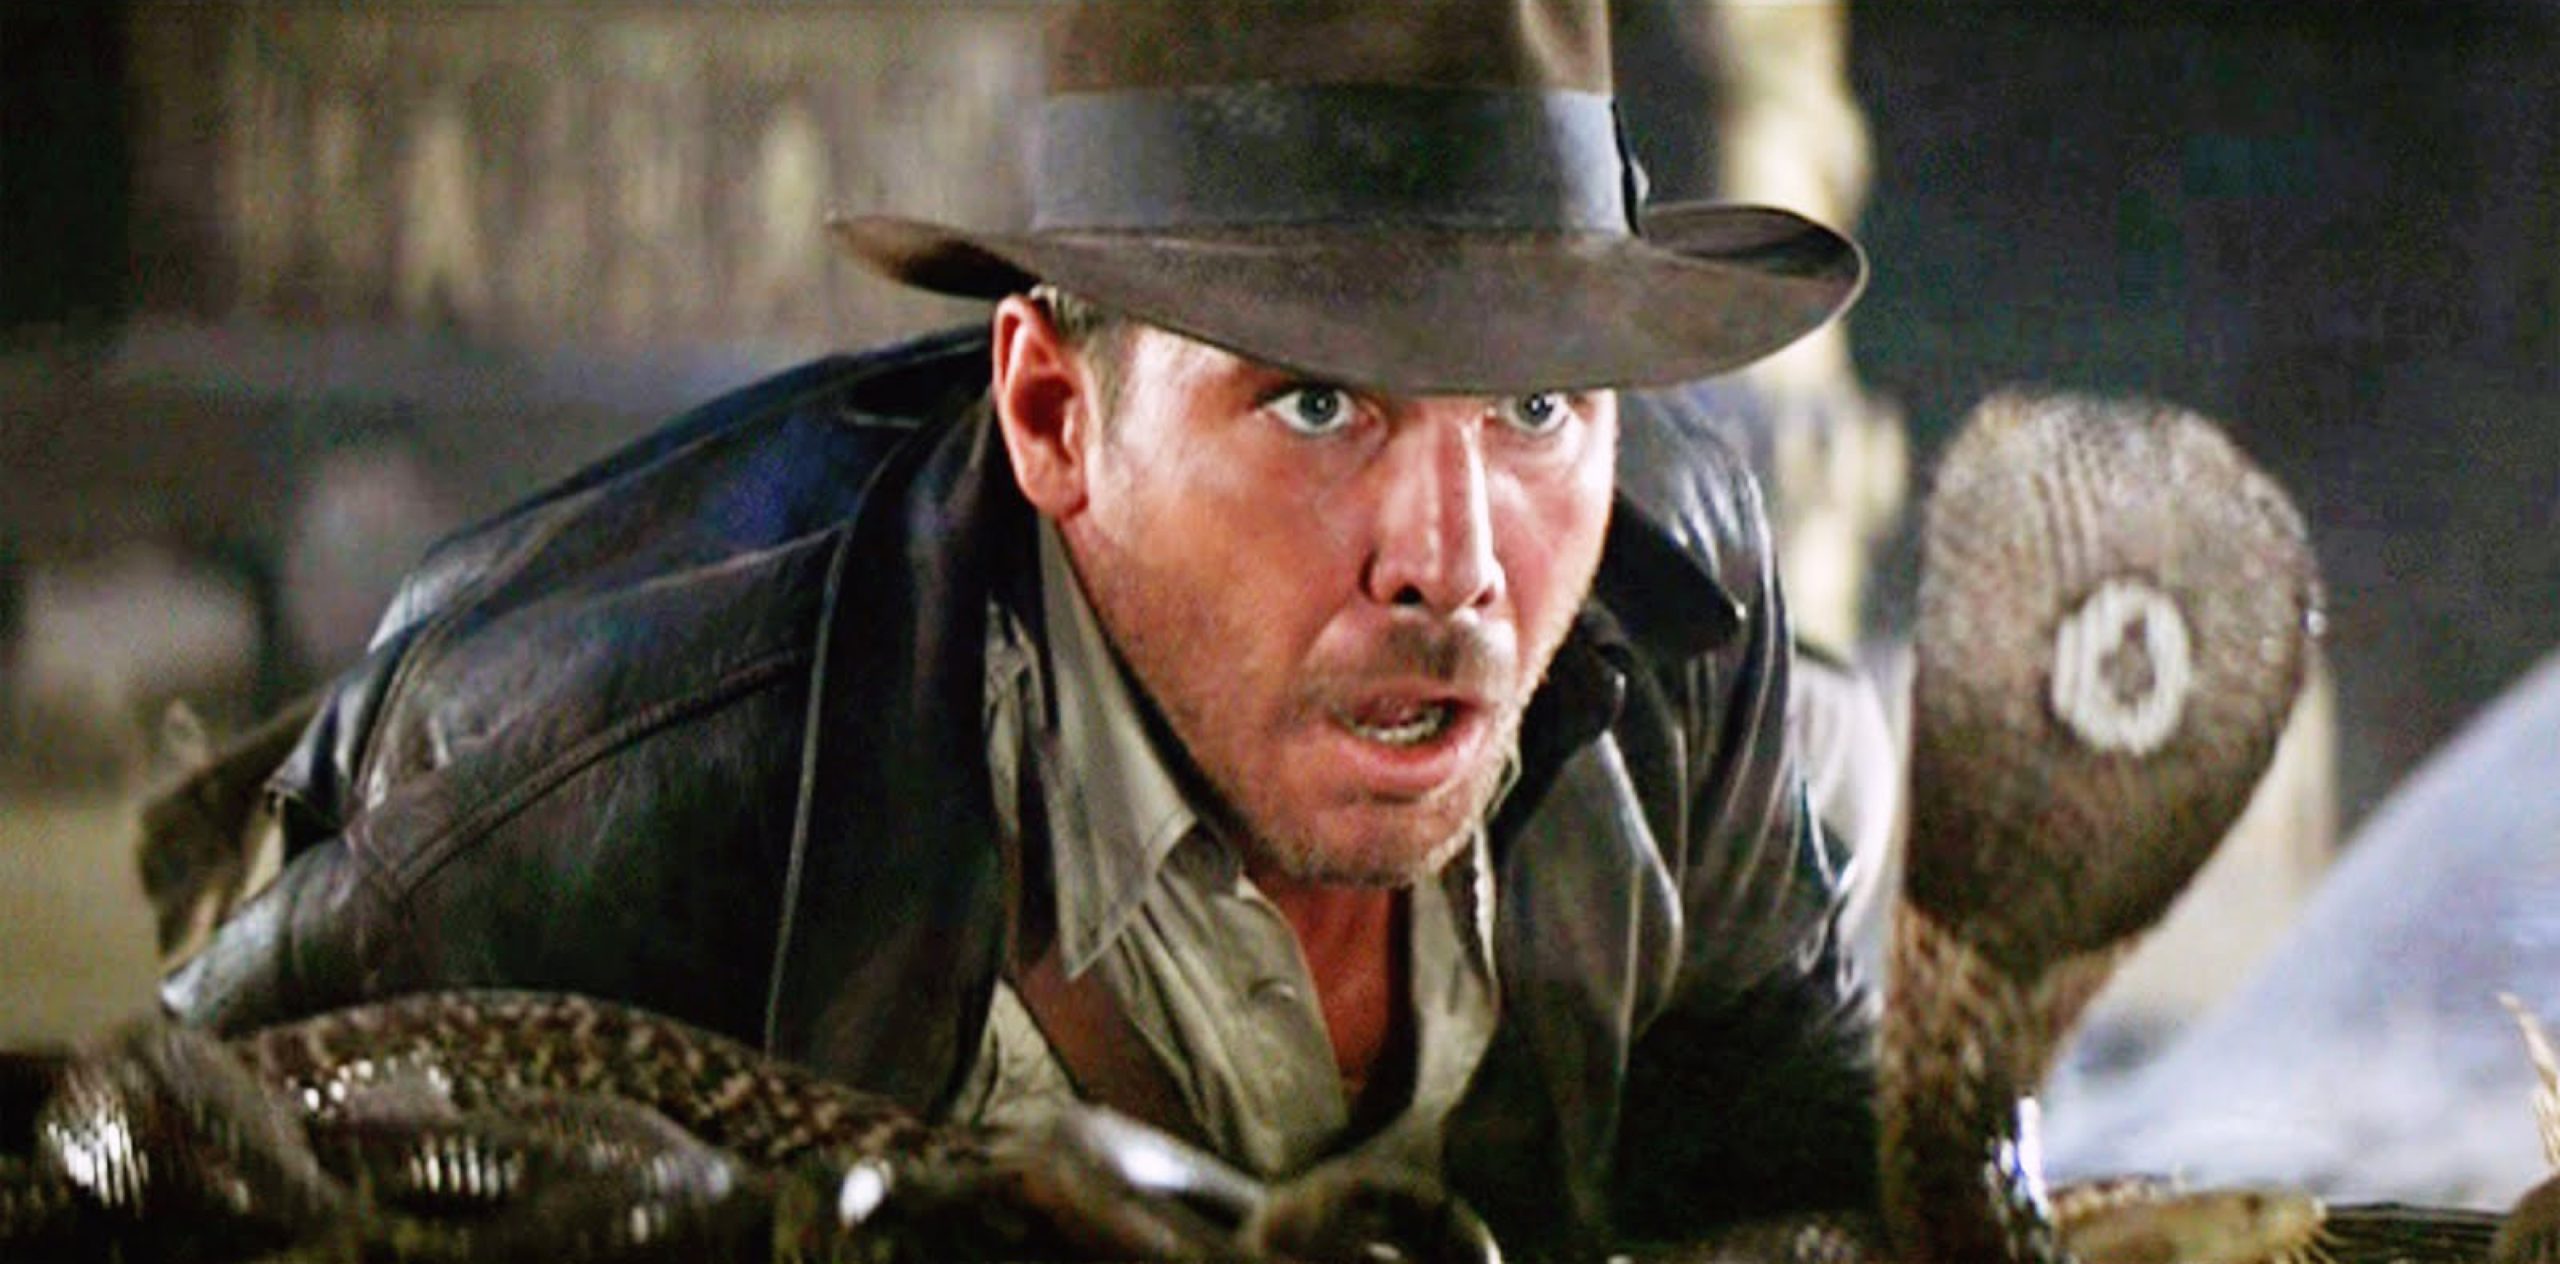 Bethesda Tease A Stand-Alone Indiana Jones Game In Partnership With Lucasfilm Games And MachineGames